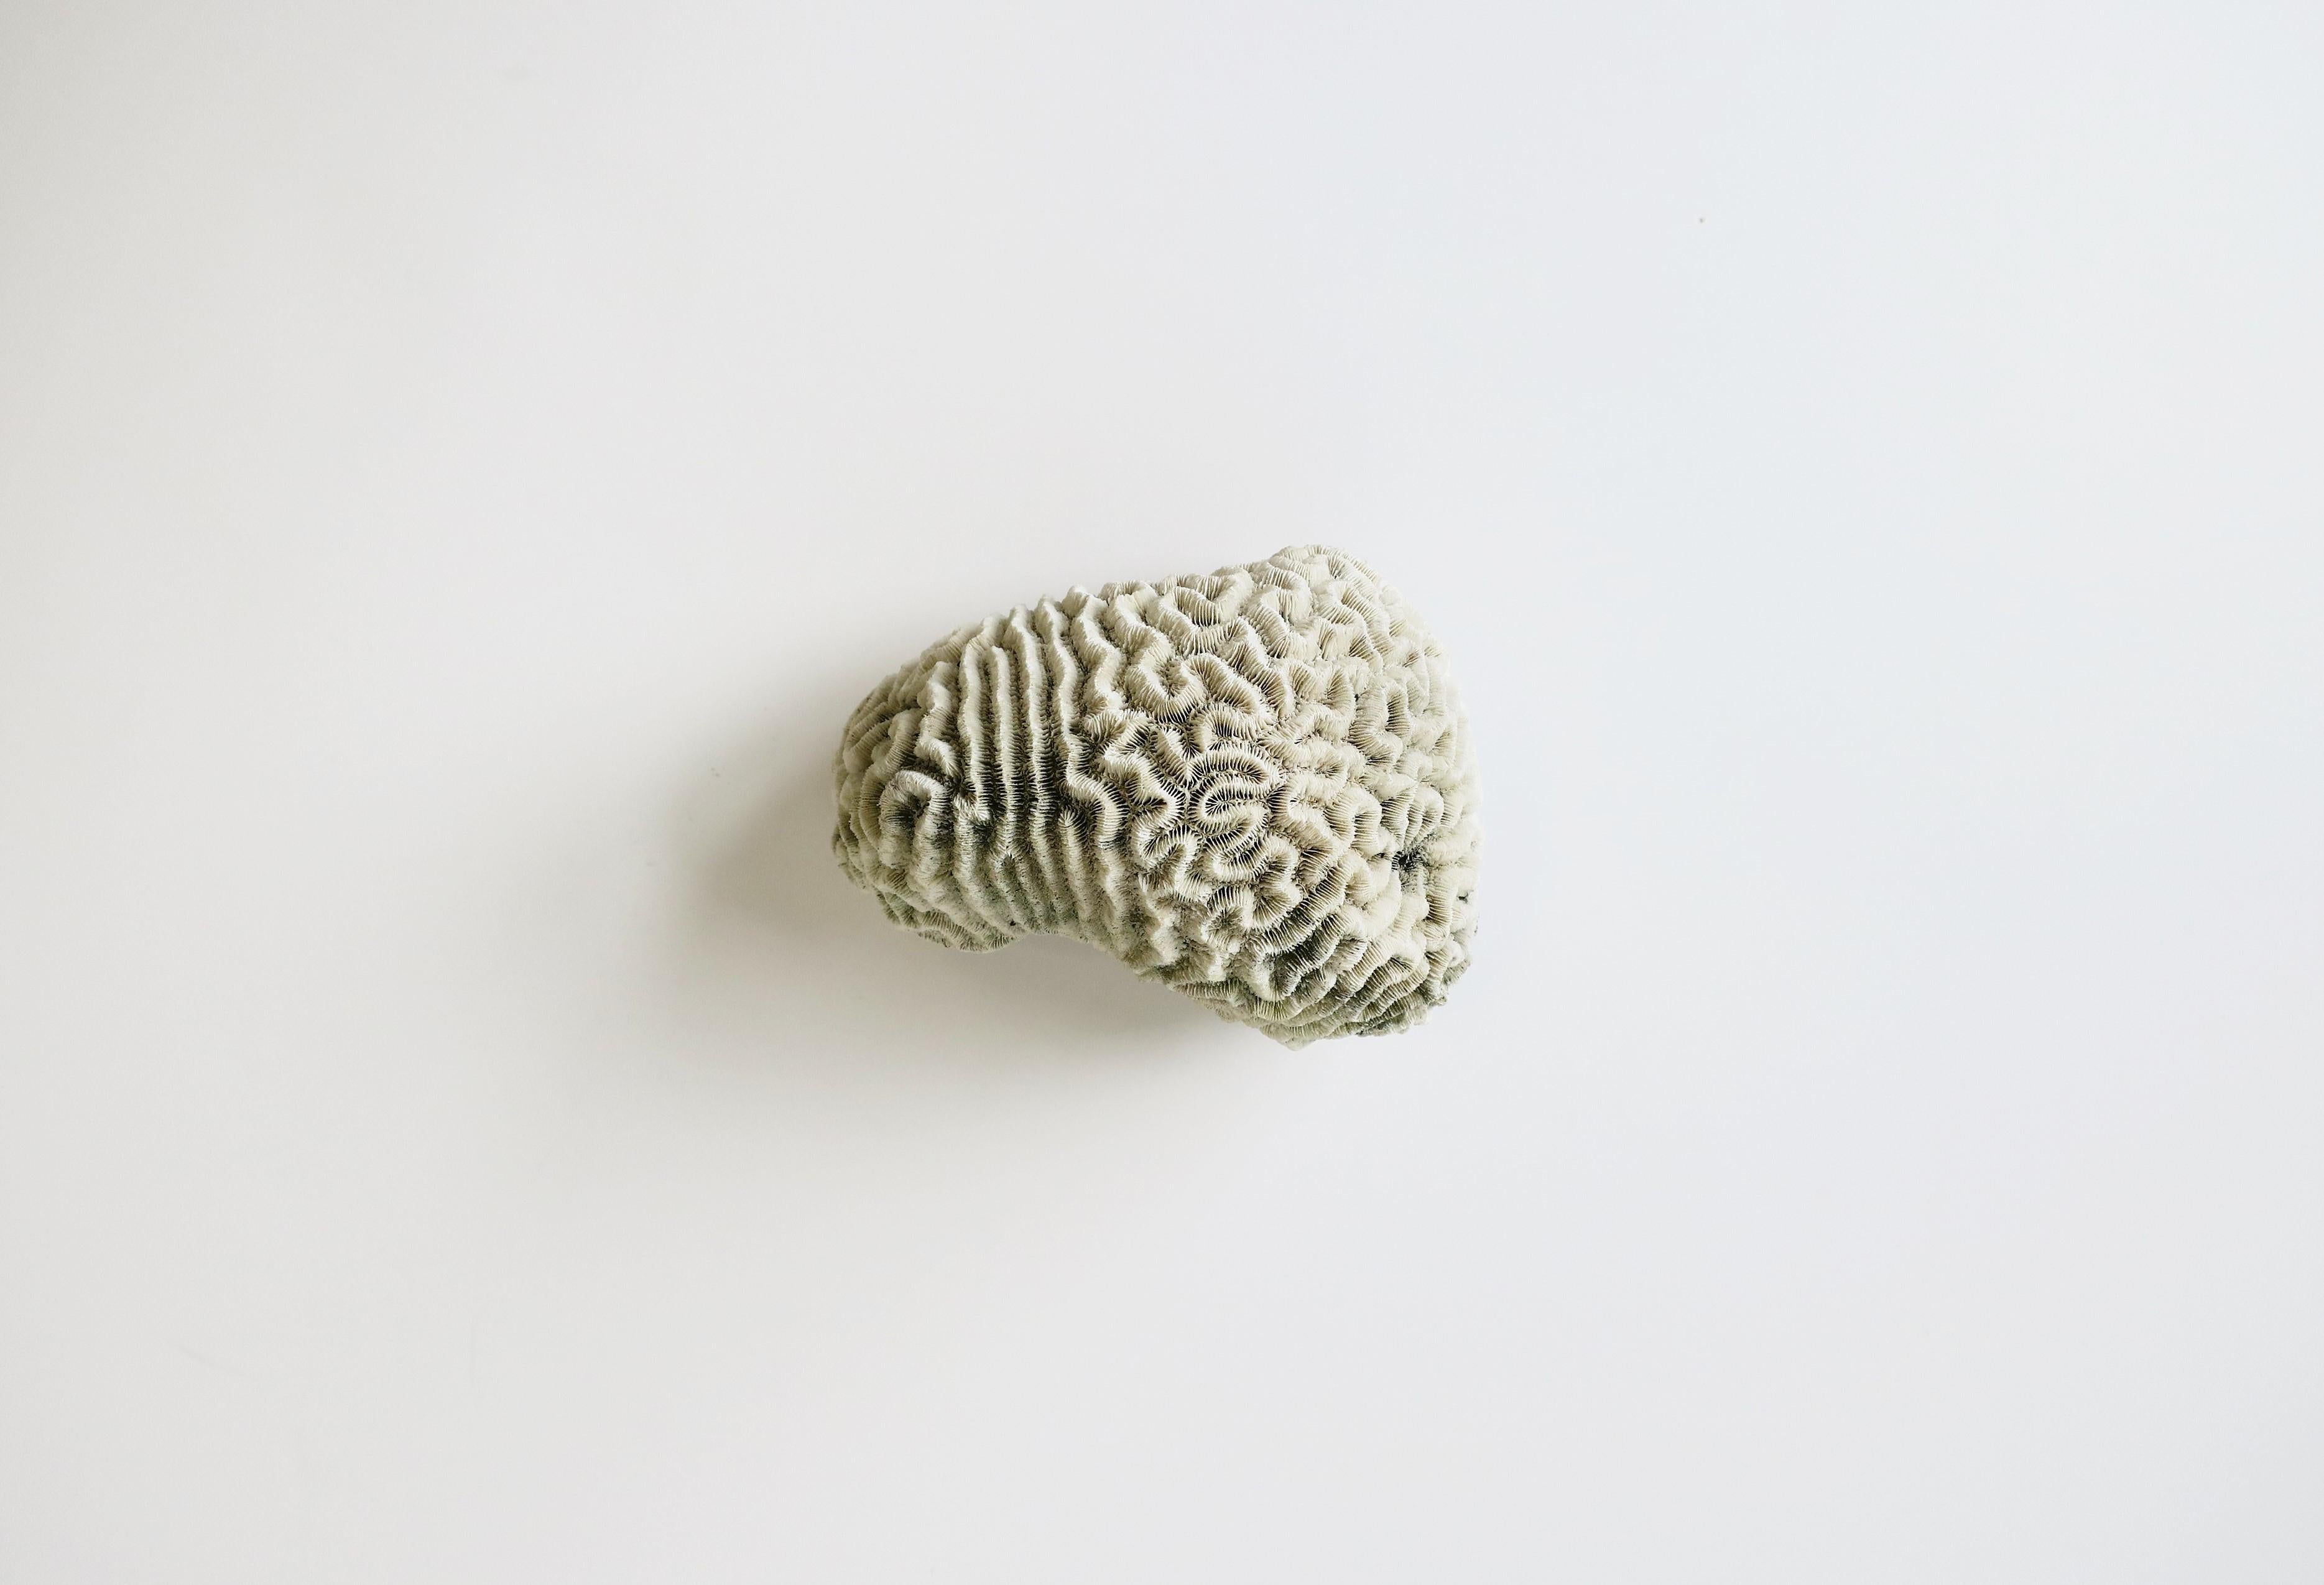 A fragment of natural brain coral. Beautiful as a standalone decorative object, use with other seashells, as a luxury item display piece, etc. Dimensions: 4